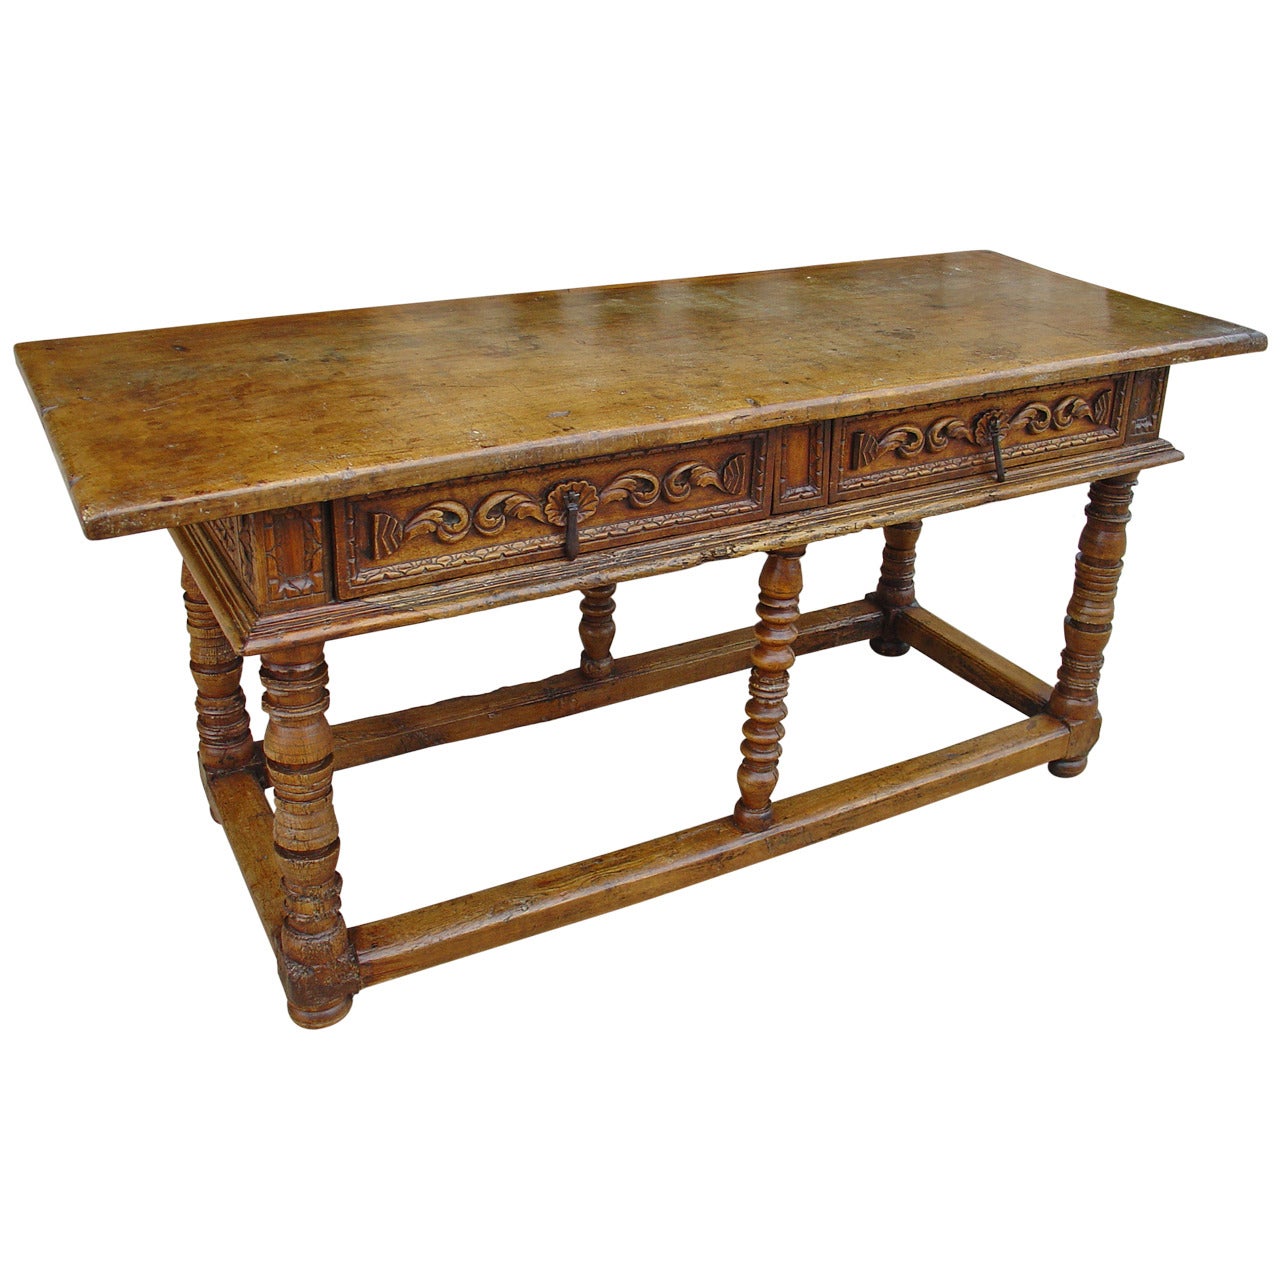 Antique Spanish Walnut Wood Table from the 1600’s